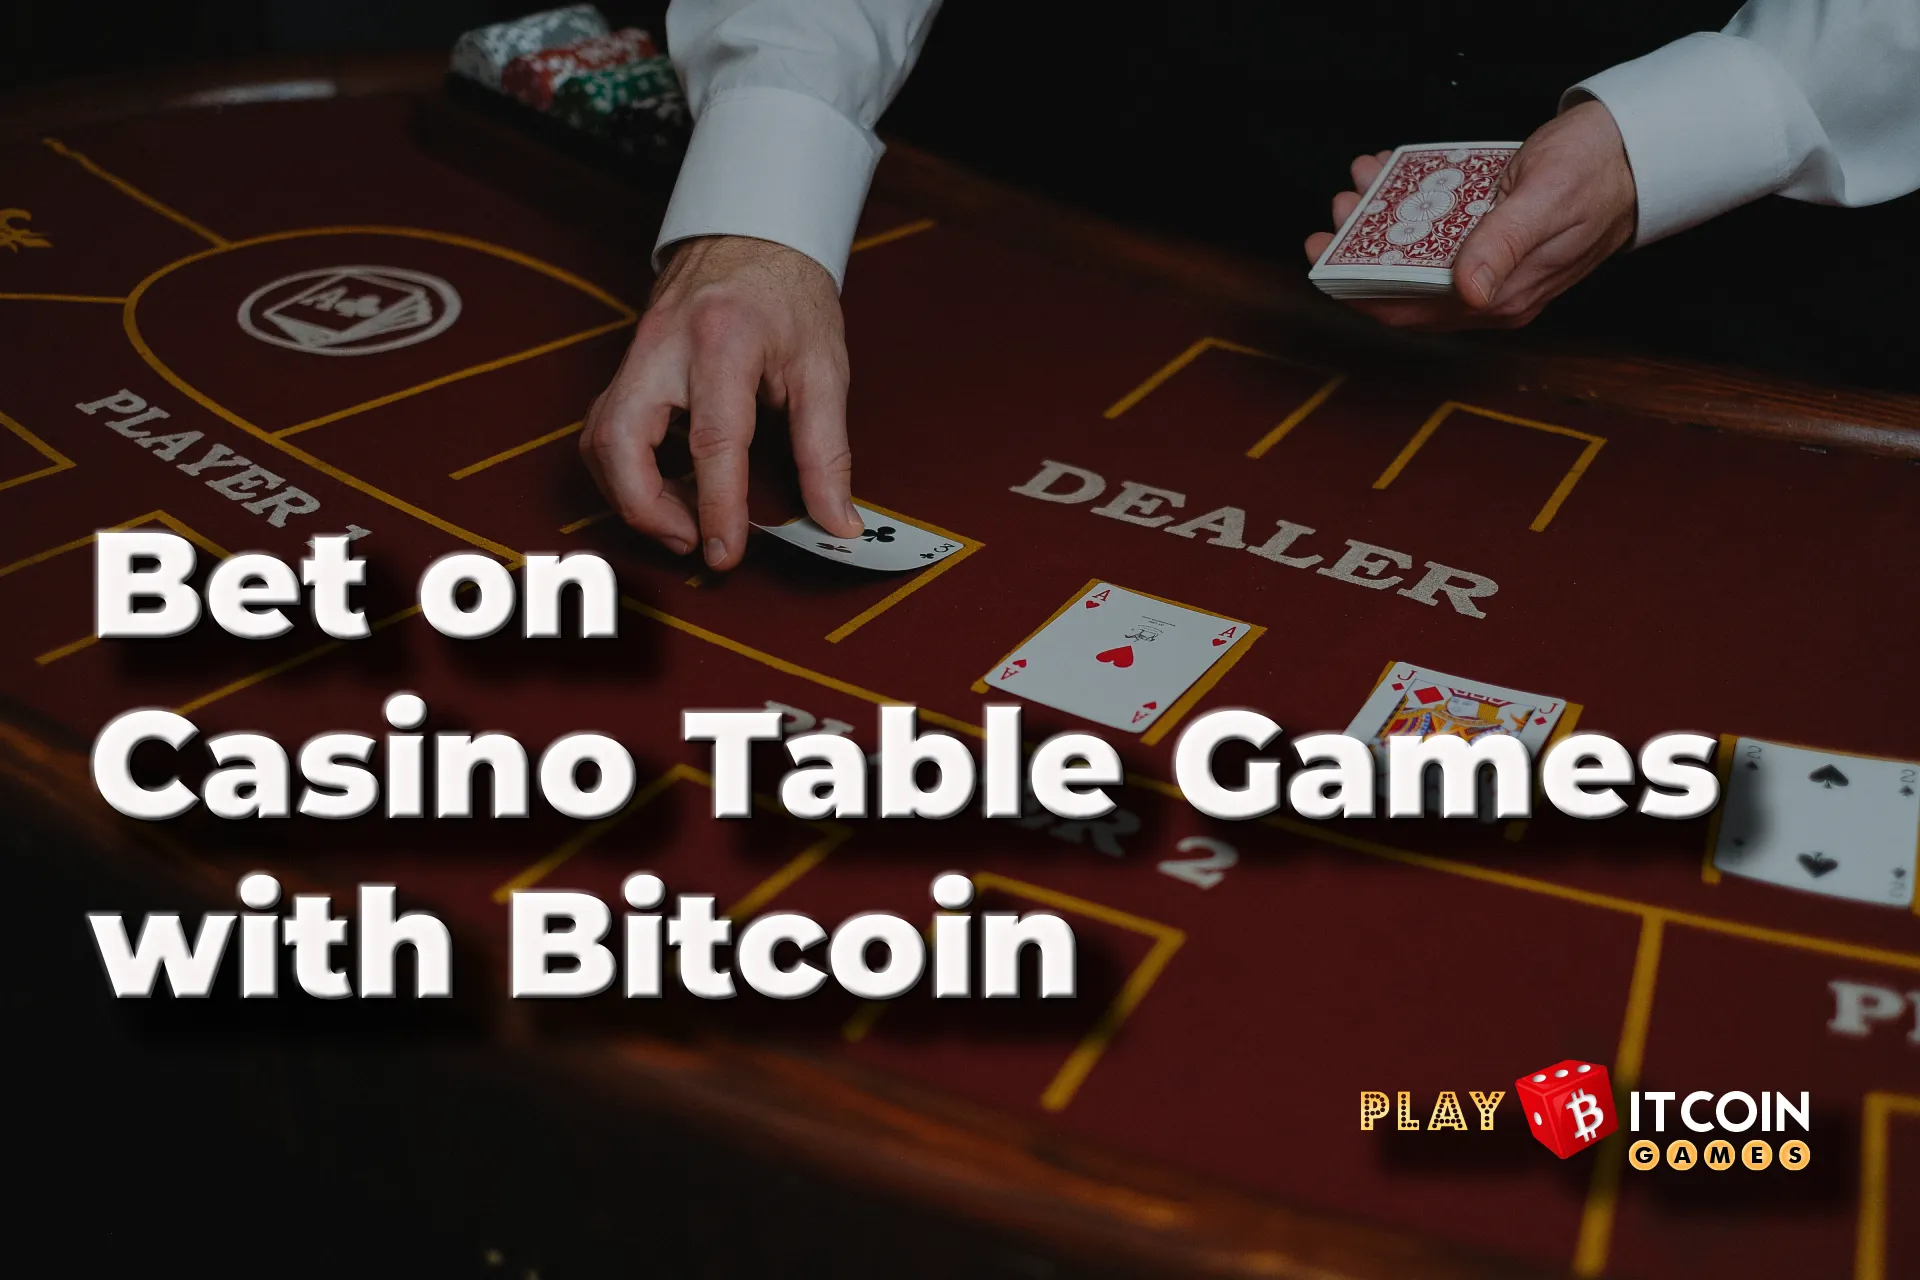 Play Casino Table Games with Bitcoin - playbitcoingames.com